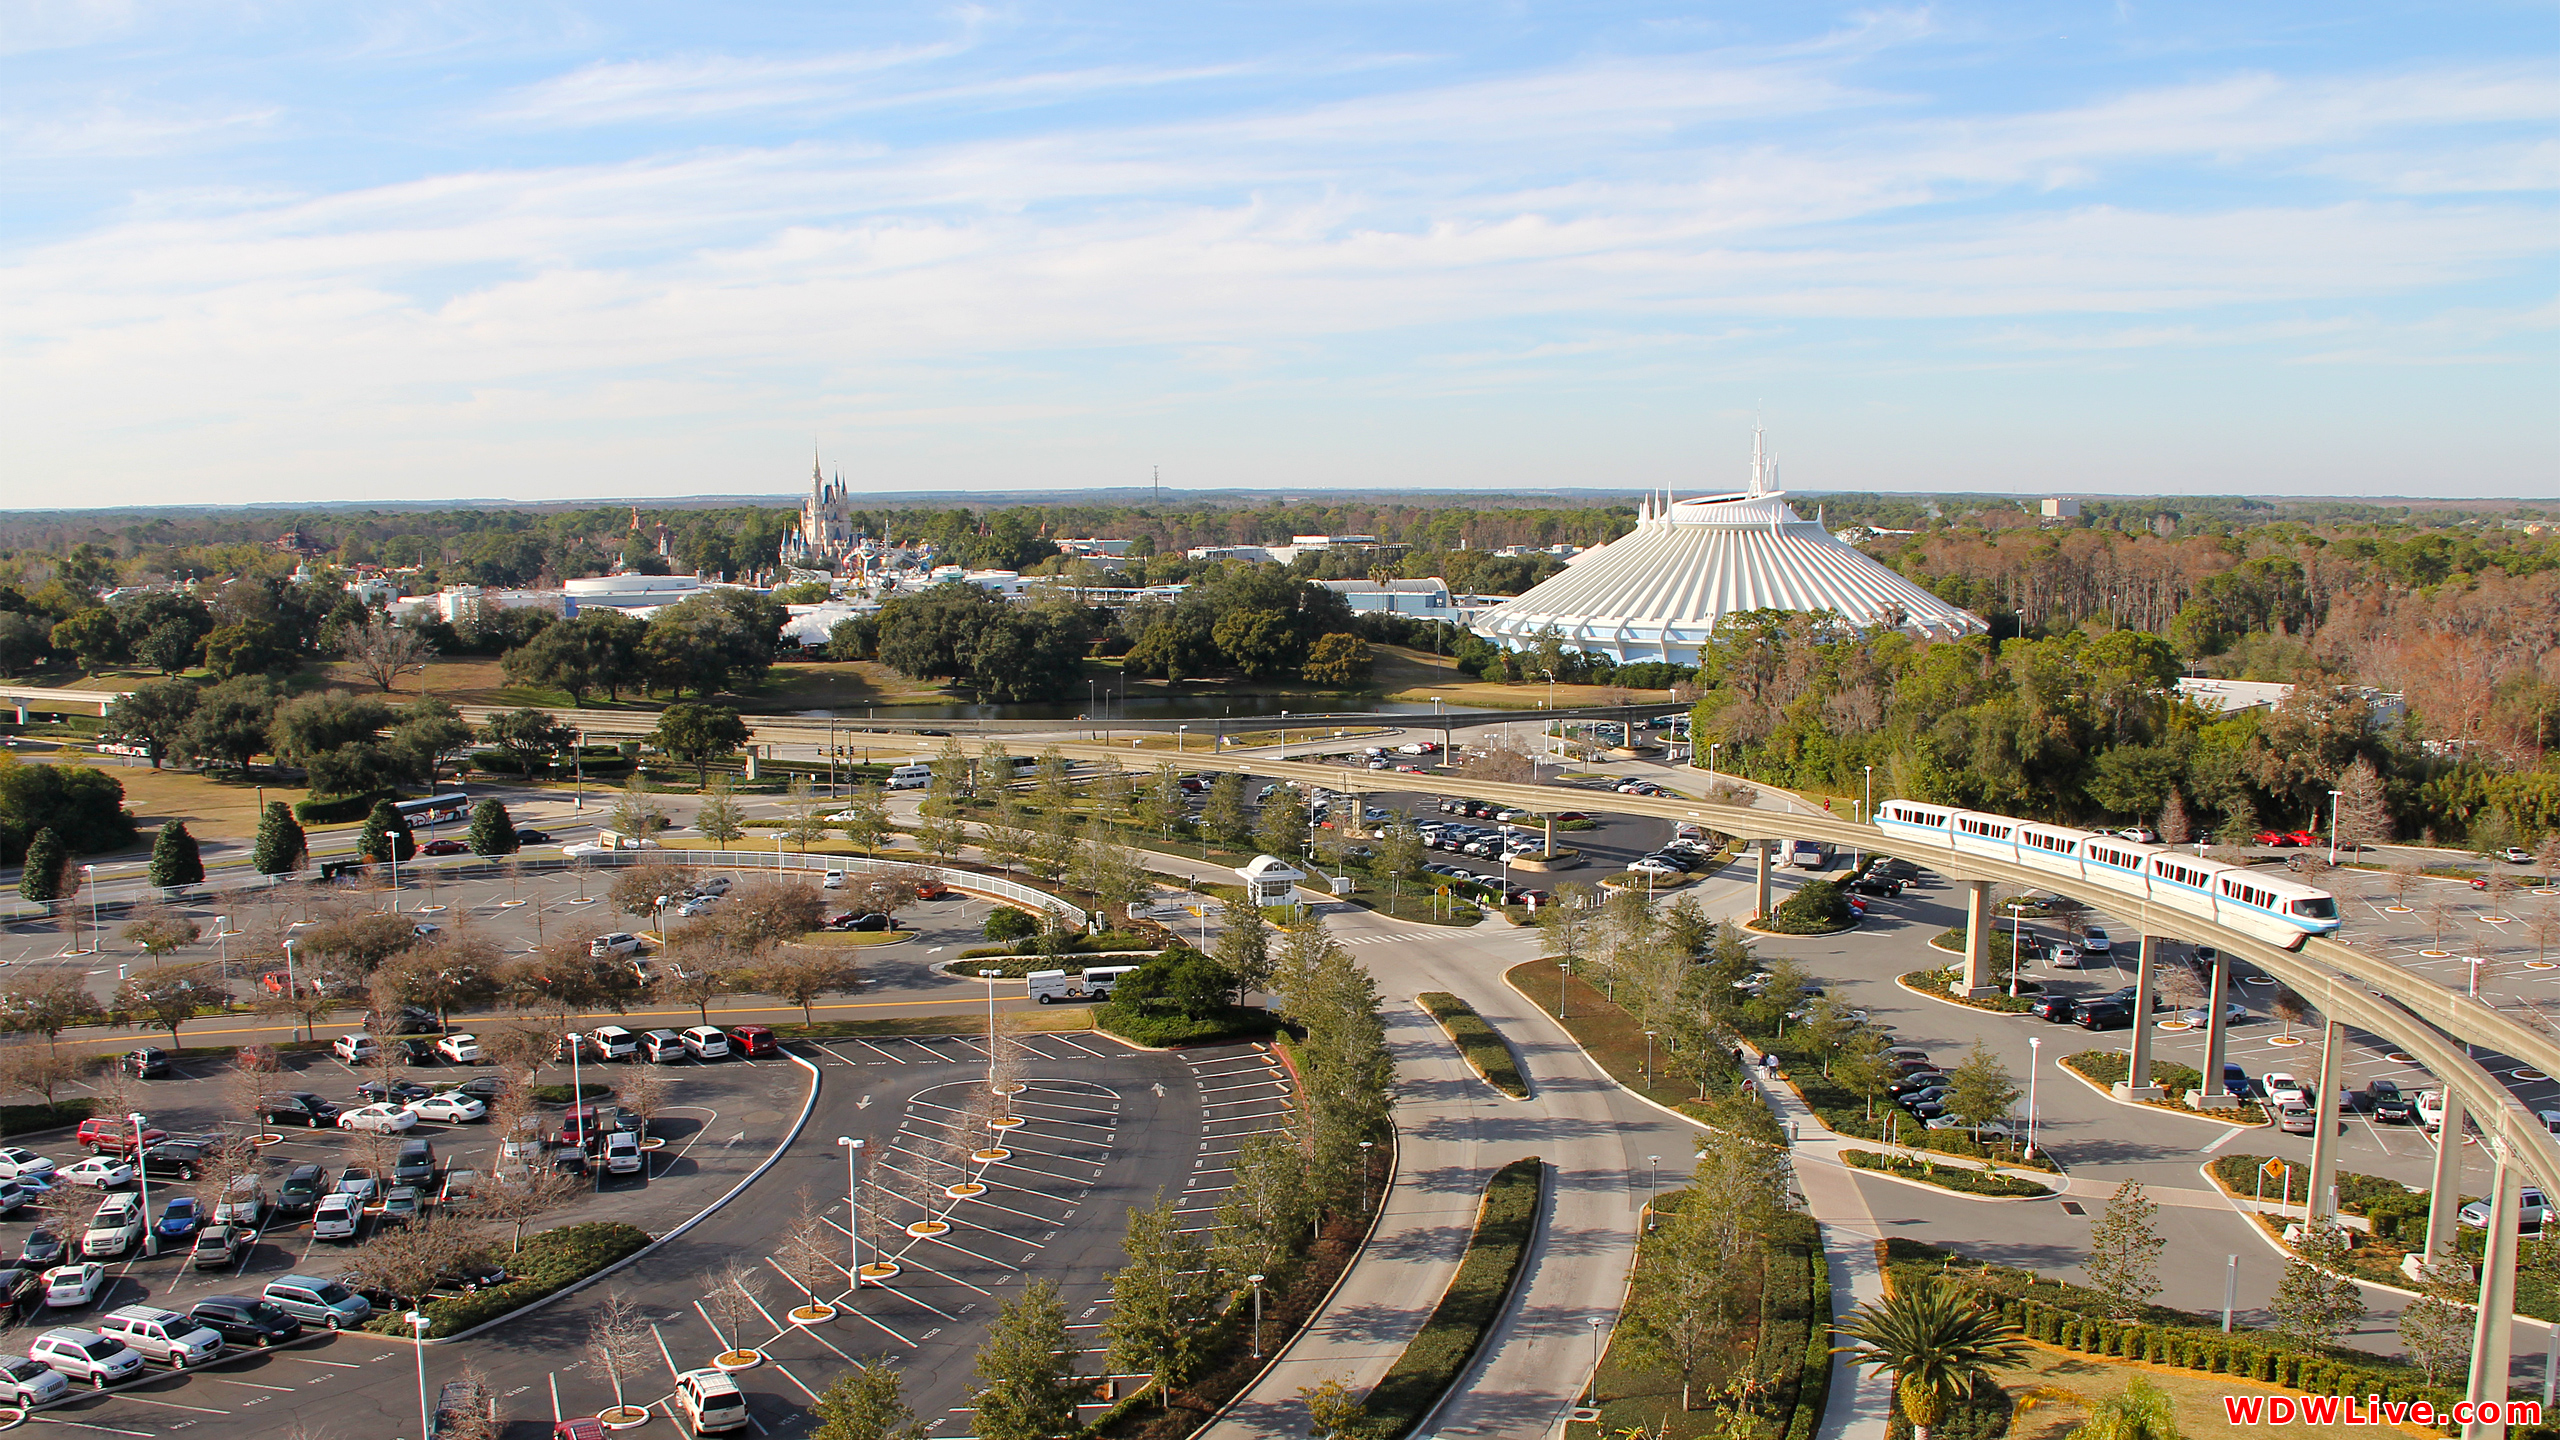 Monorail View of the Magic Kingdom from the Contemporary Resort